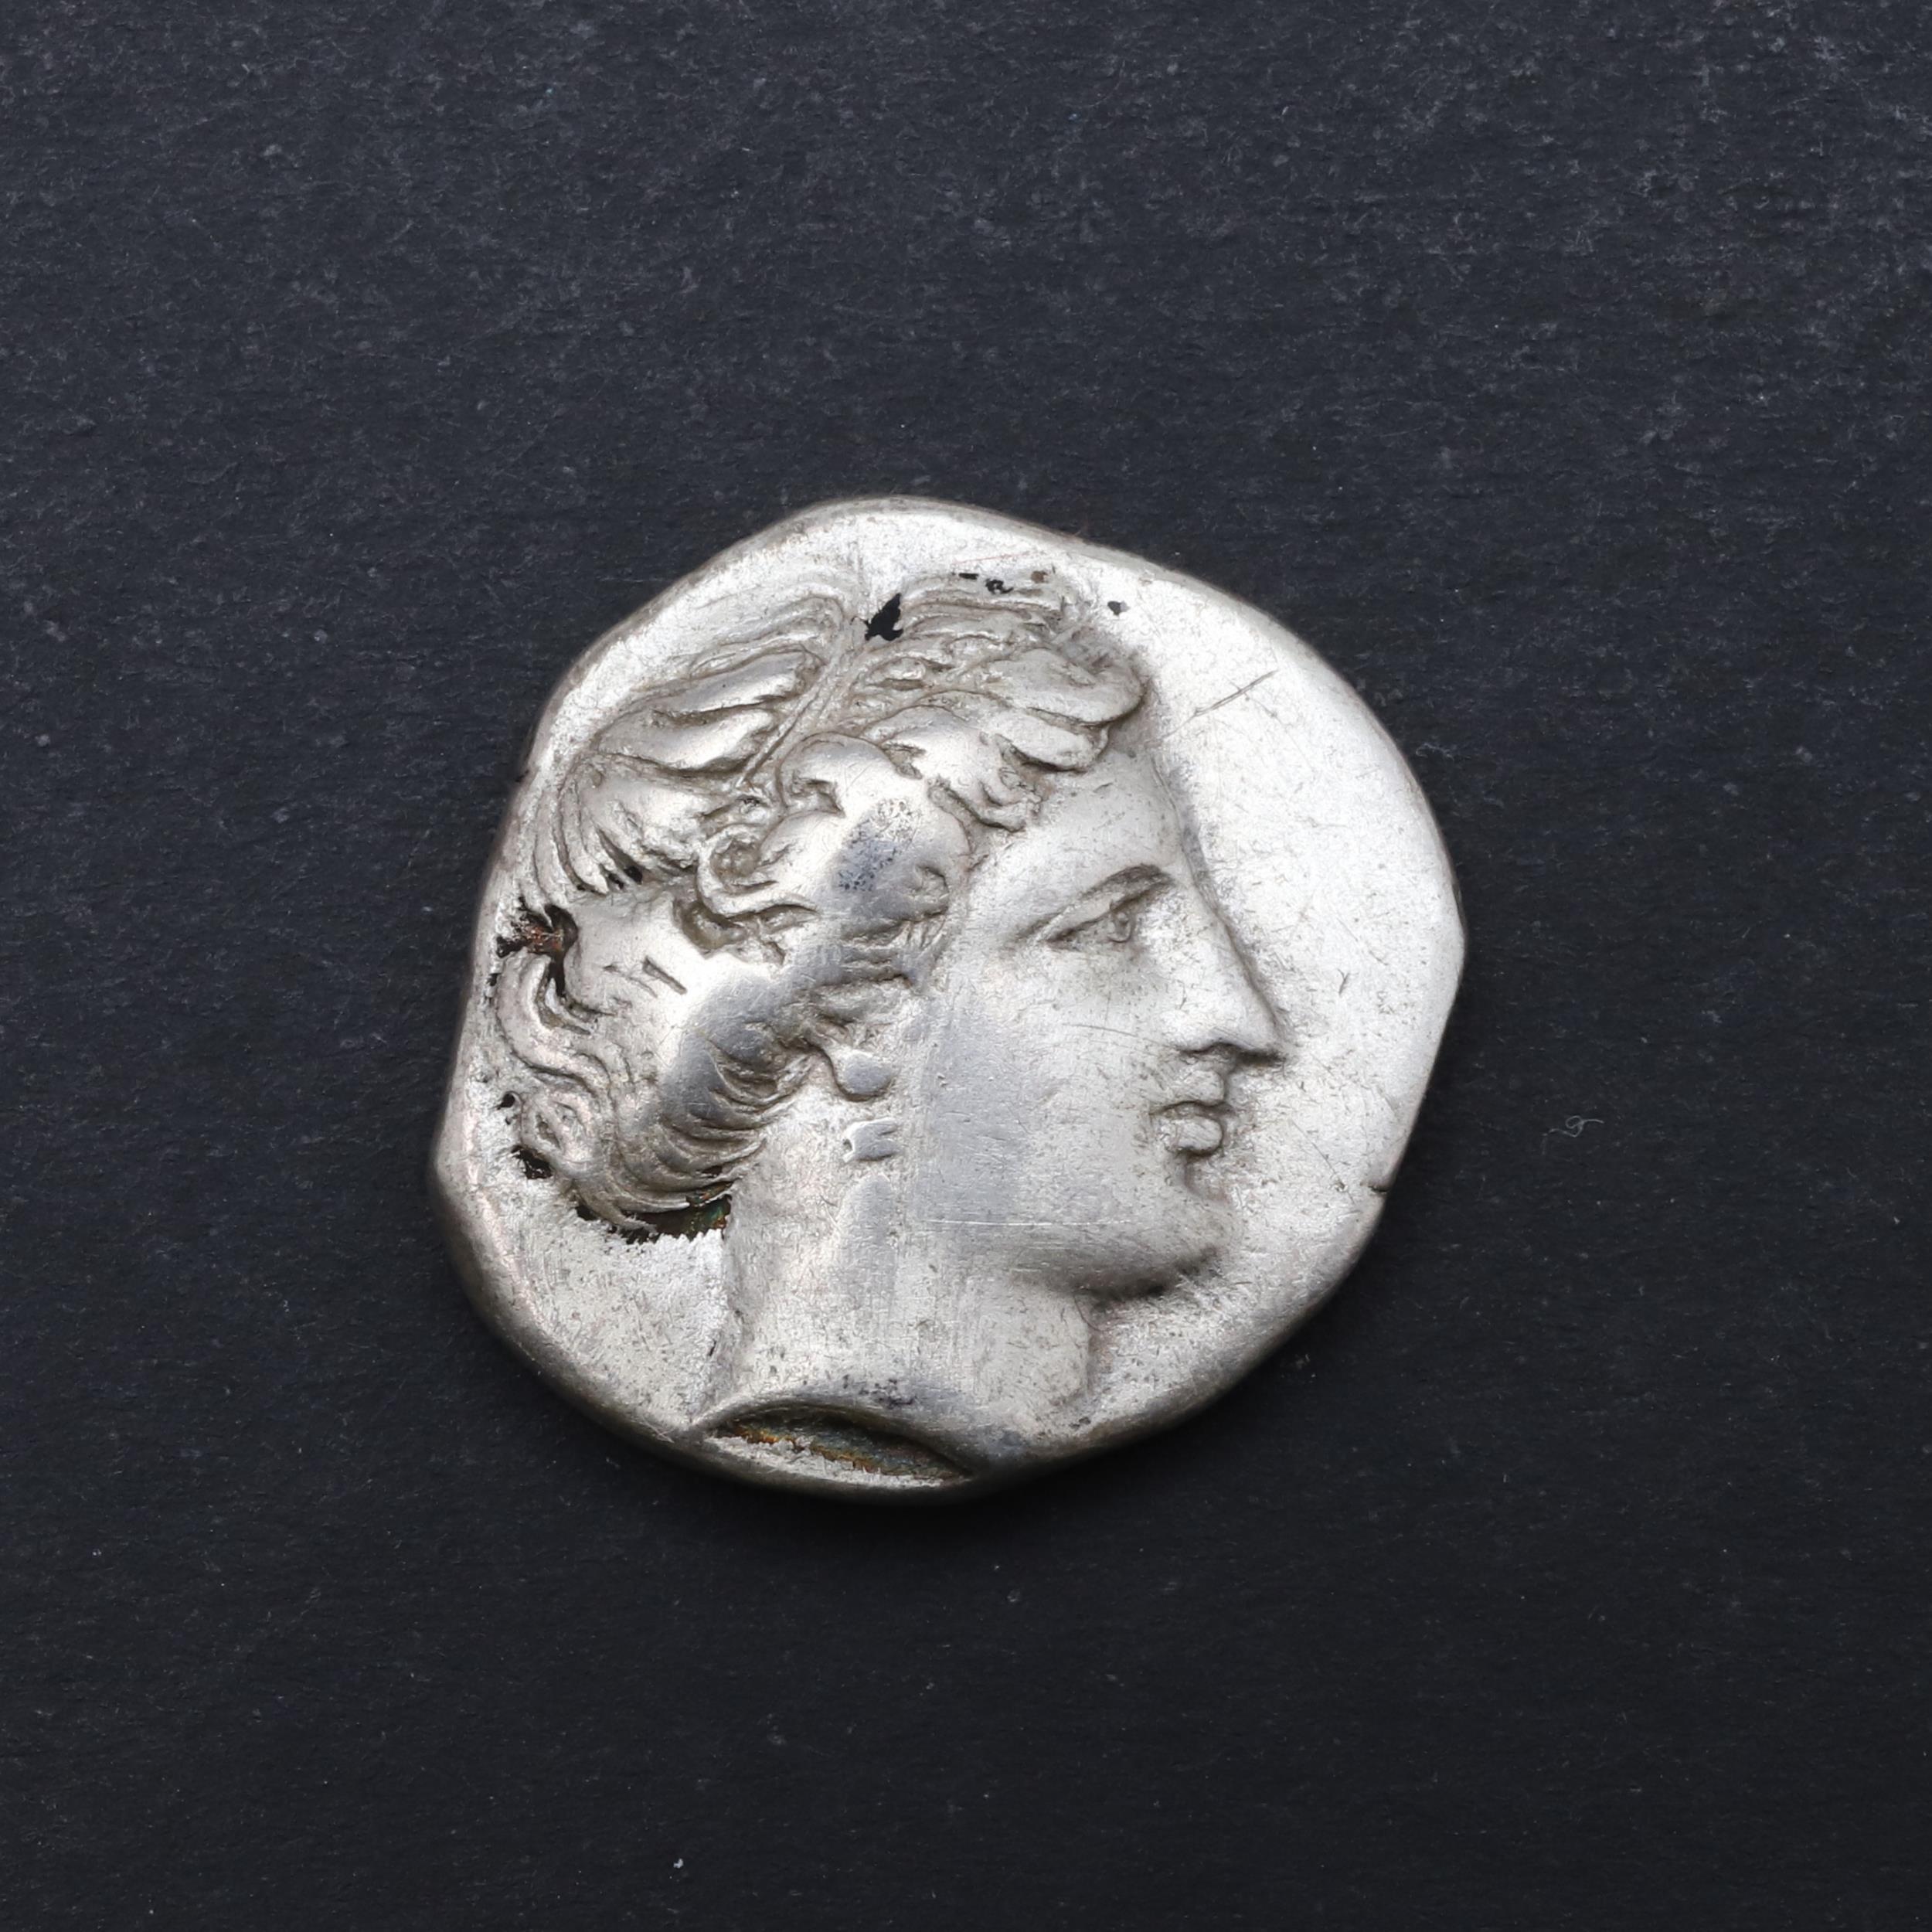 GREEK COINS: METAPONTION, SILVER STATER, 330 - 300 BC.